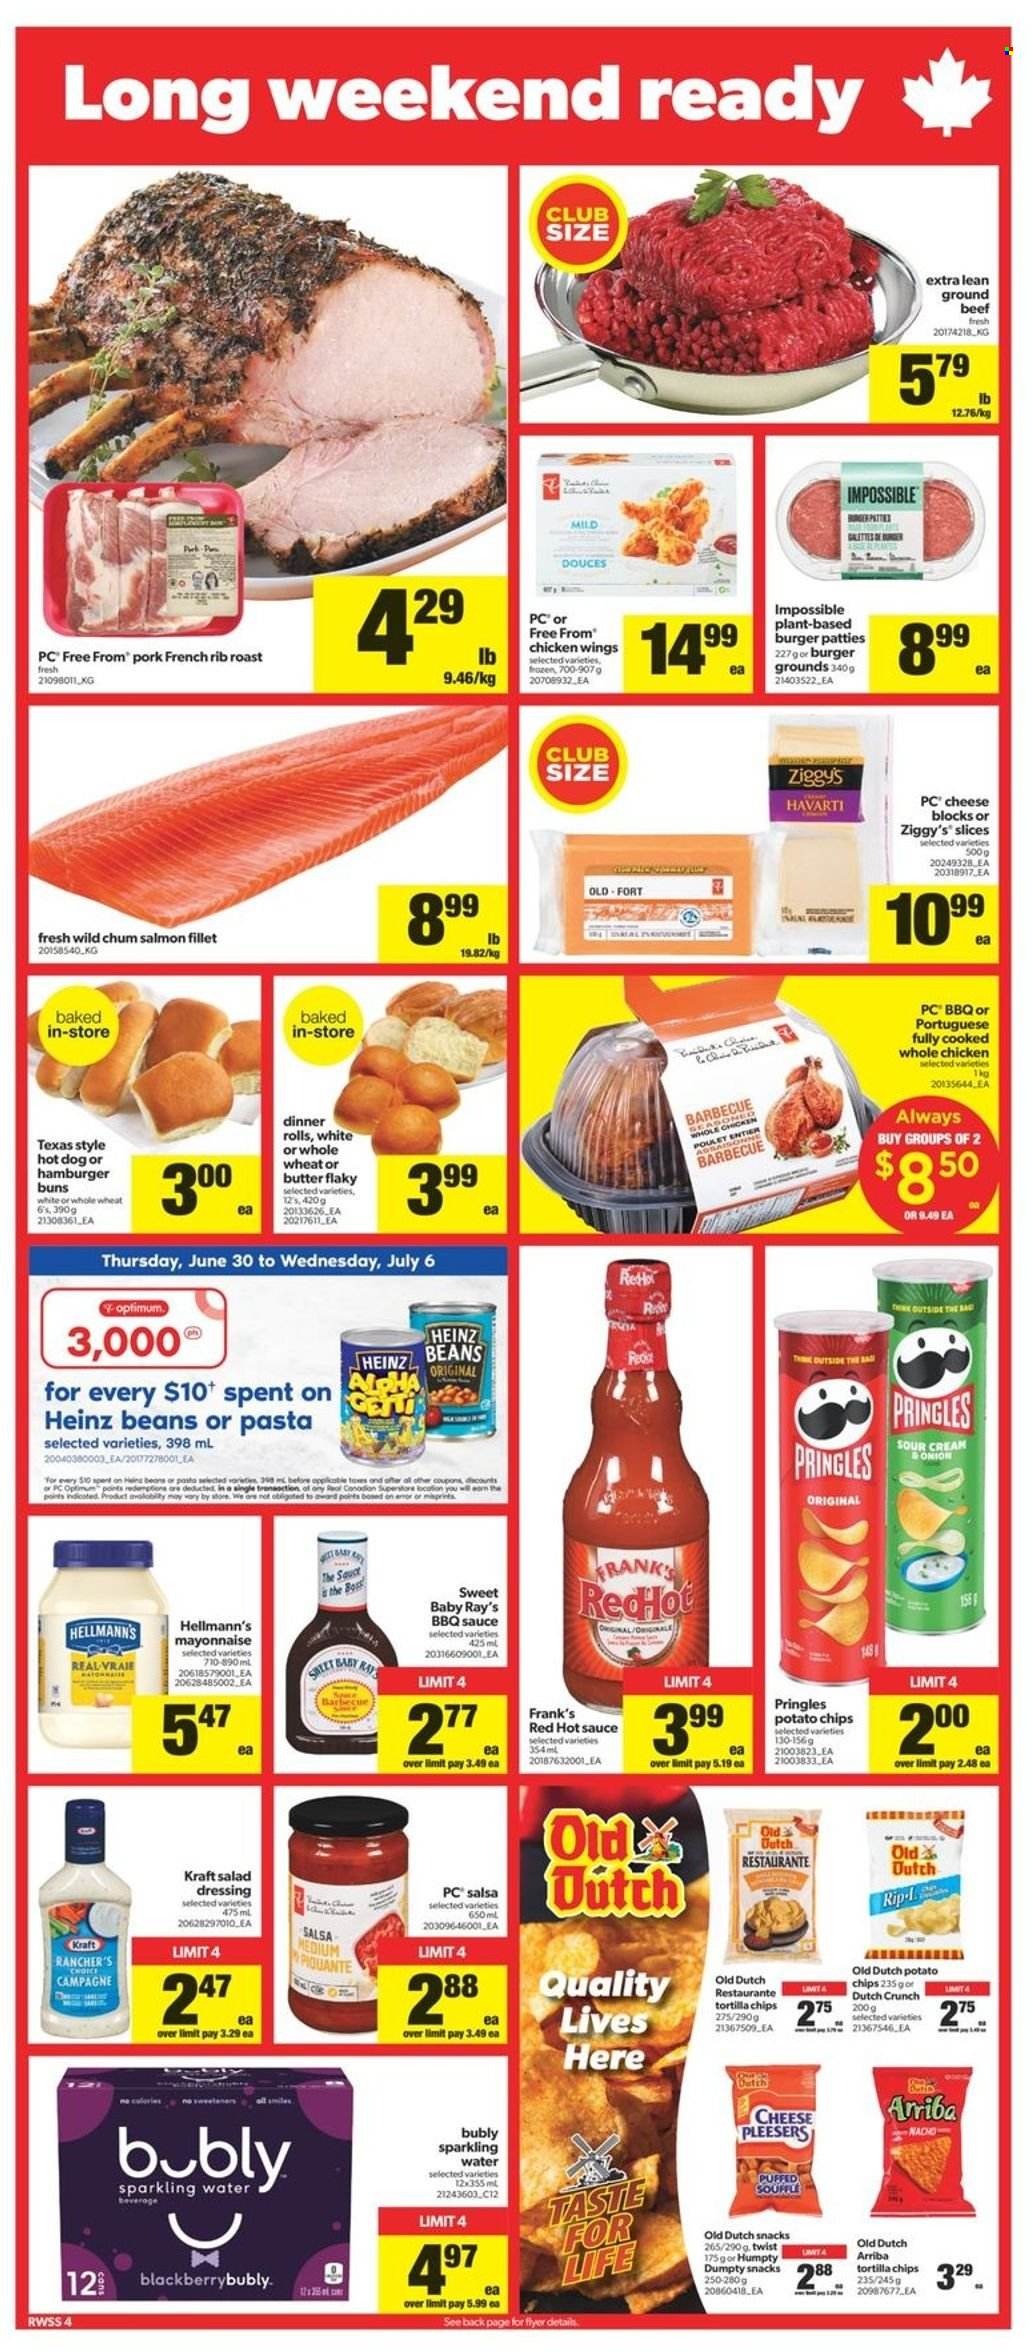 thumbnail - Real Canadian Superstore Flyer - June 30, 2022 - July 06, 2022 - Sales products - dinner rolls, buns, burger buns, beans, onion, salmon, salmon fillet, hot dog, sauce, Kraft®, Havarti, butter, sour cream, mayonnaise, Hellmann’s, chicken wings, snack, tortilla chips, potato chips, Pringles, BBQ sauce, salad dressing, hot sauce, dressing, salsa, sparkling water, whole chicken, chicken, beef meat, ground beef, burger patties, Optimum, Heinz. Page 4.